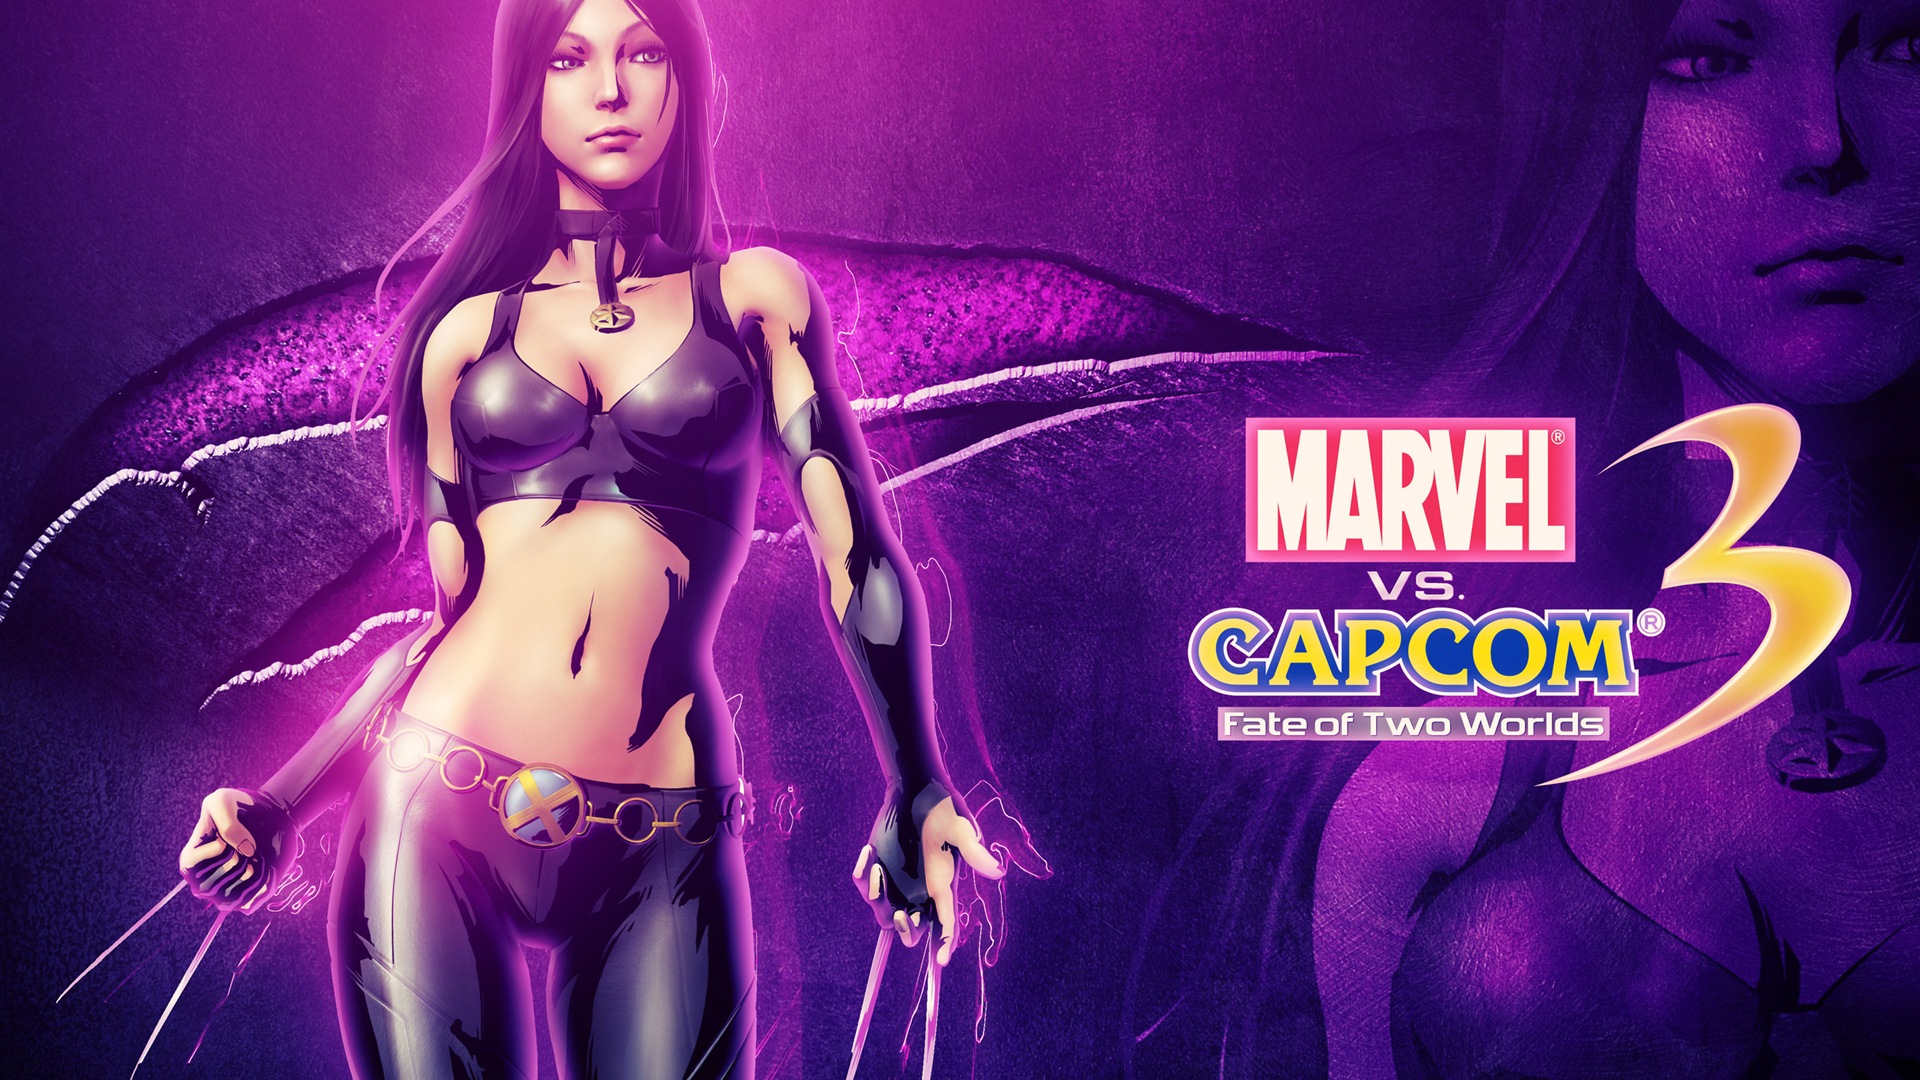 Marvel VS. Capcom 3: Fate of Two Worlds HD game wallpapers #10 - 1920x1080